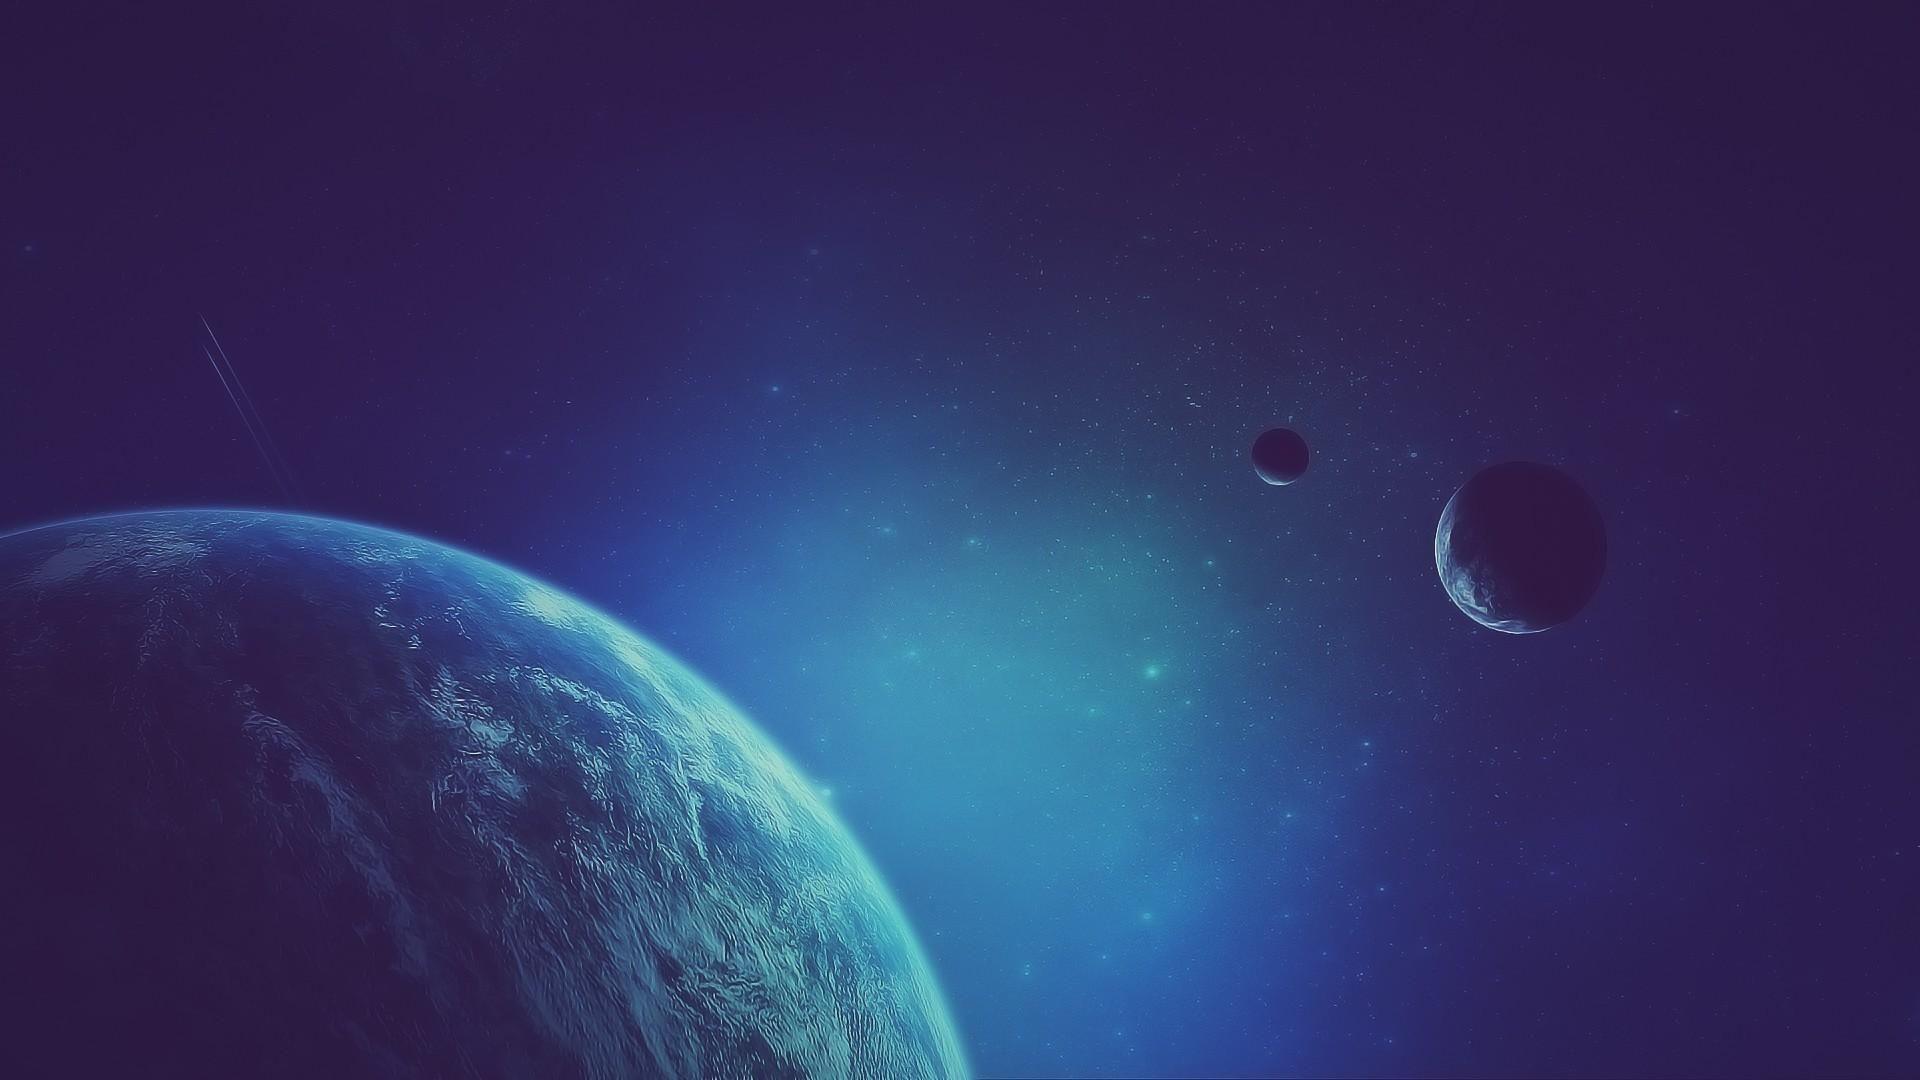 Dark stars planets earth shooting star blurred wallpapers